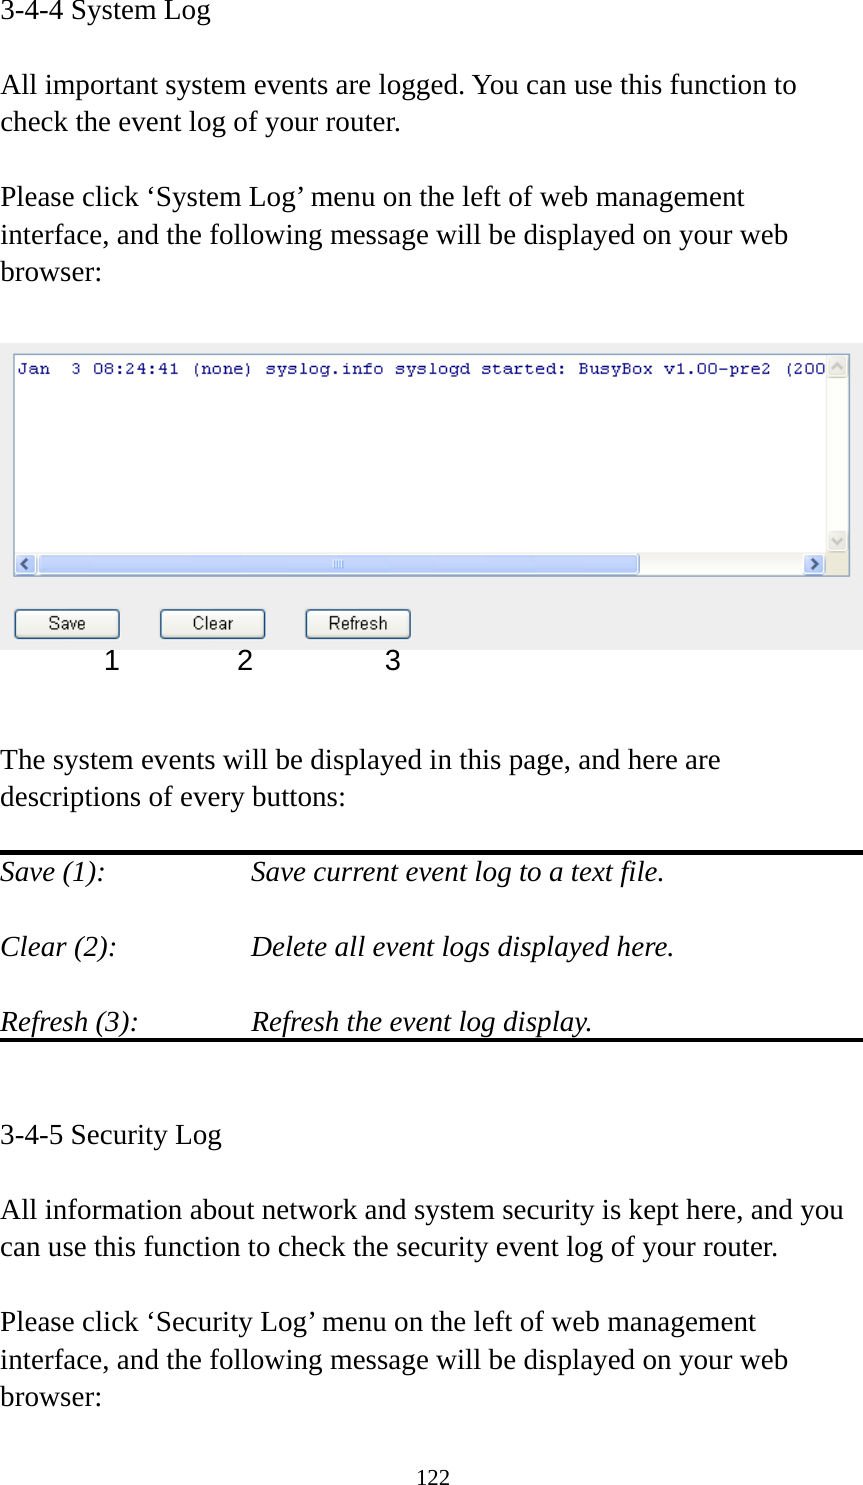 122 3-4-4 System Log  All important system events are logged. You can use this function to check the event log of your router.  Please click ‘System Log’ menu on the left of web management interface, and the following message will be displayed on your web browser:     The system events will be displayed in this page, and here are descriptions of every buttons:  Save (1):        Save current event log to a text file.  Clear (2):        Delete all event logs displayed here.  Refresh (3):      Refresh the event log display.   3-4-5 Security Log  All information about network and system security is kept here, and you can use this function to check the security event log of your router.  Please click ‘Security Log’ menu on the left of web management interface, and the following message will be displayed on your web browser: 1 2  3